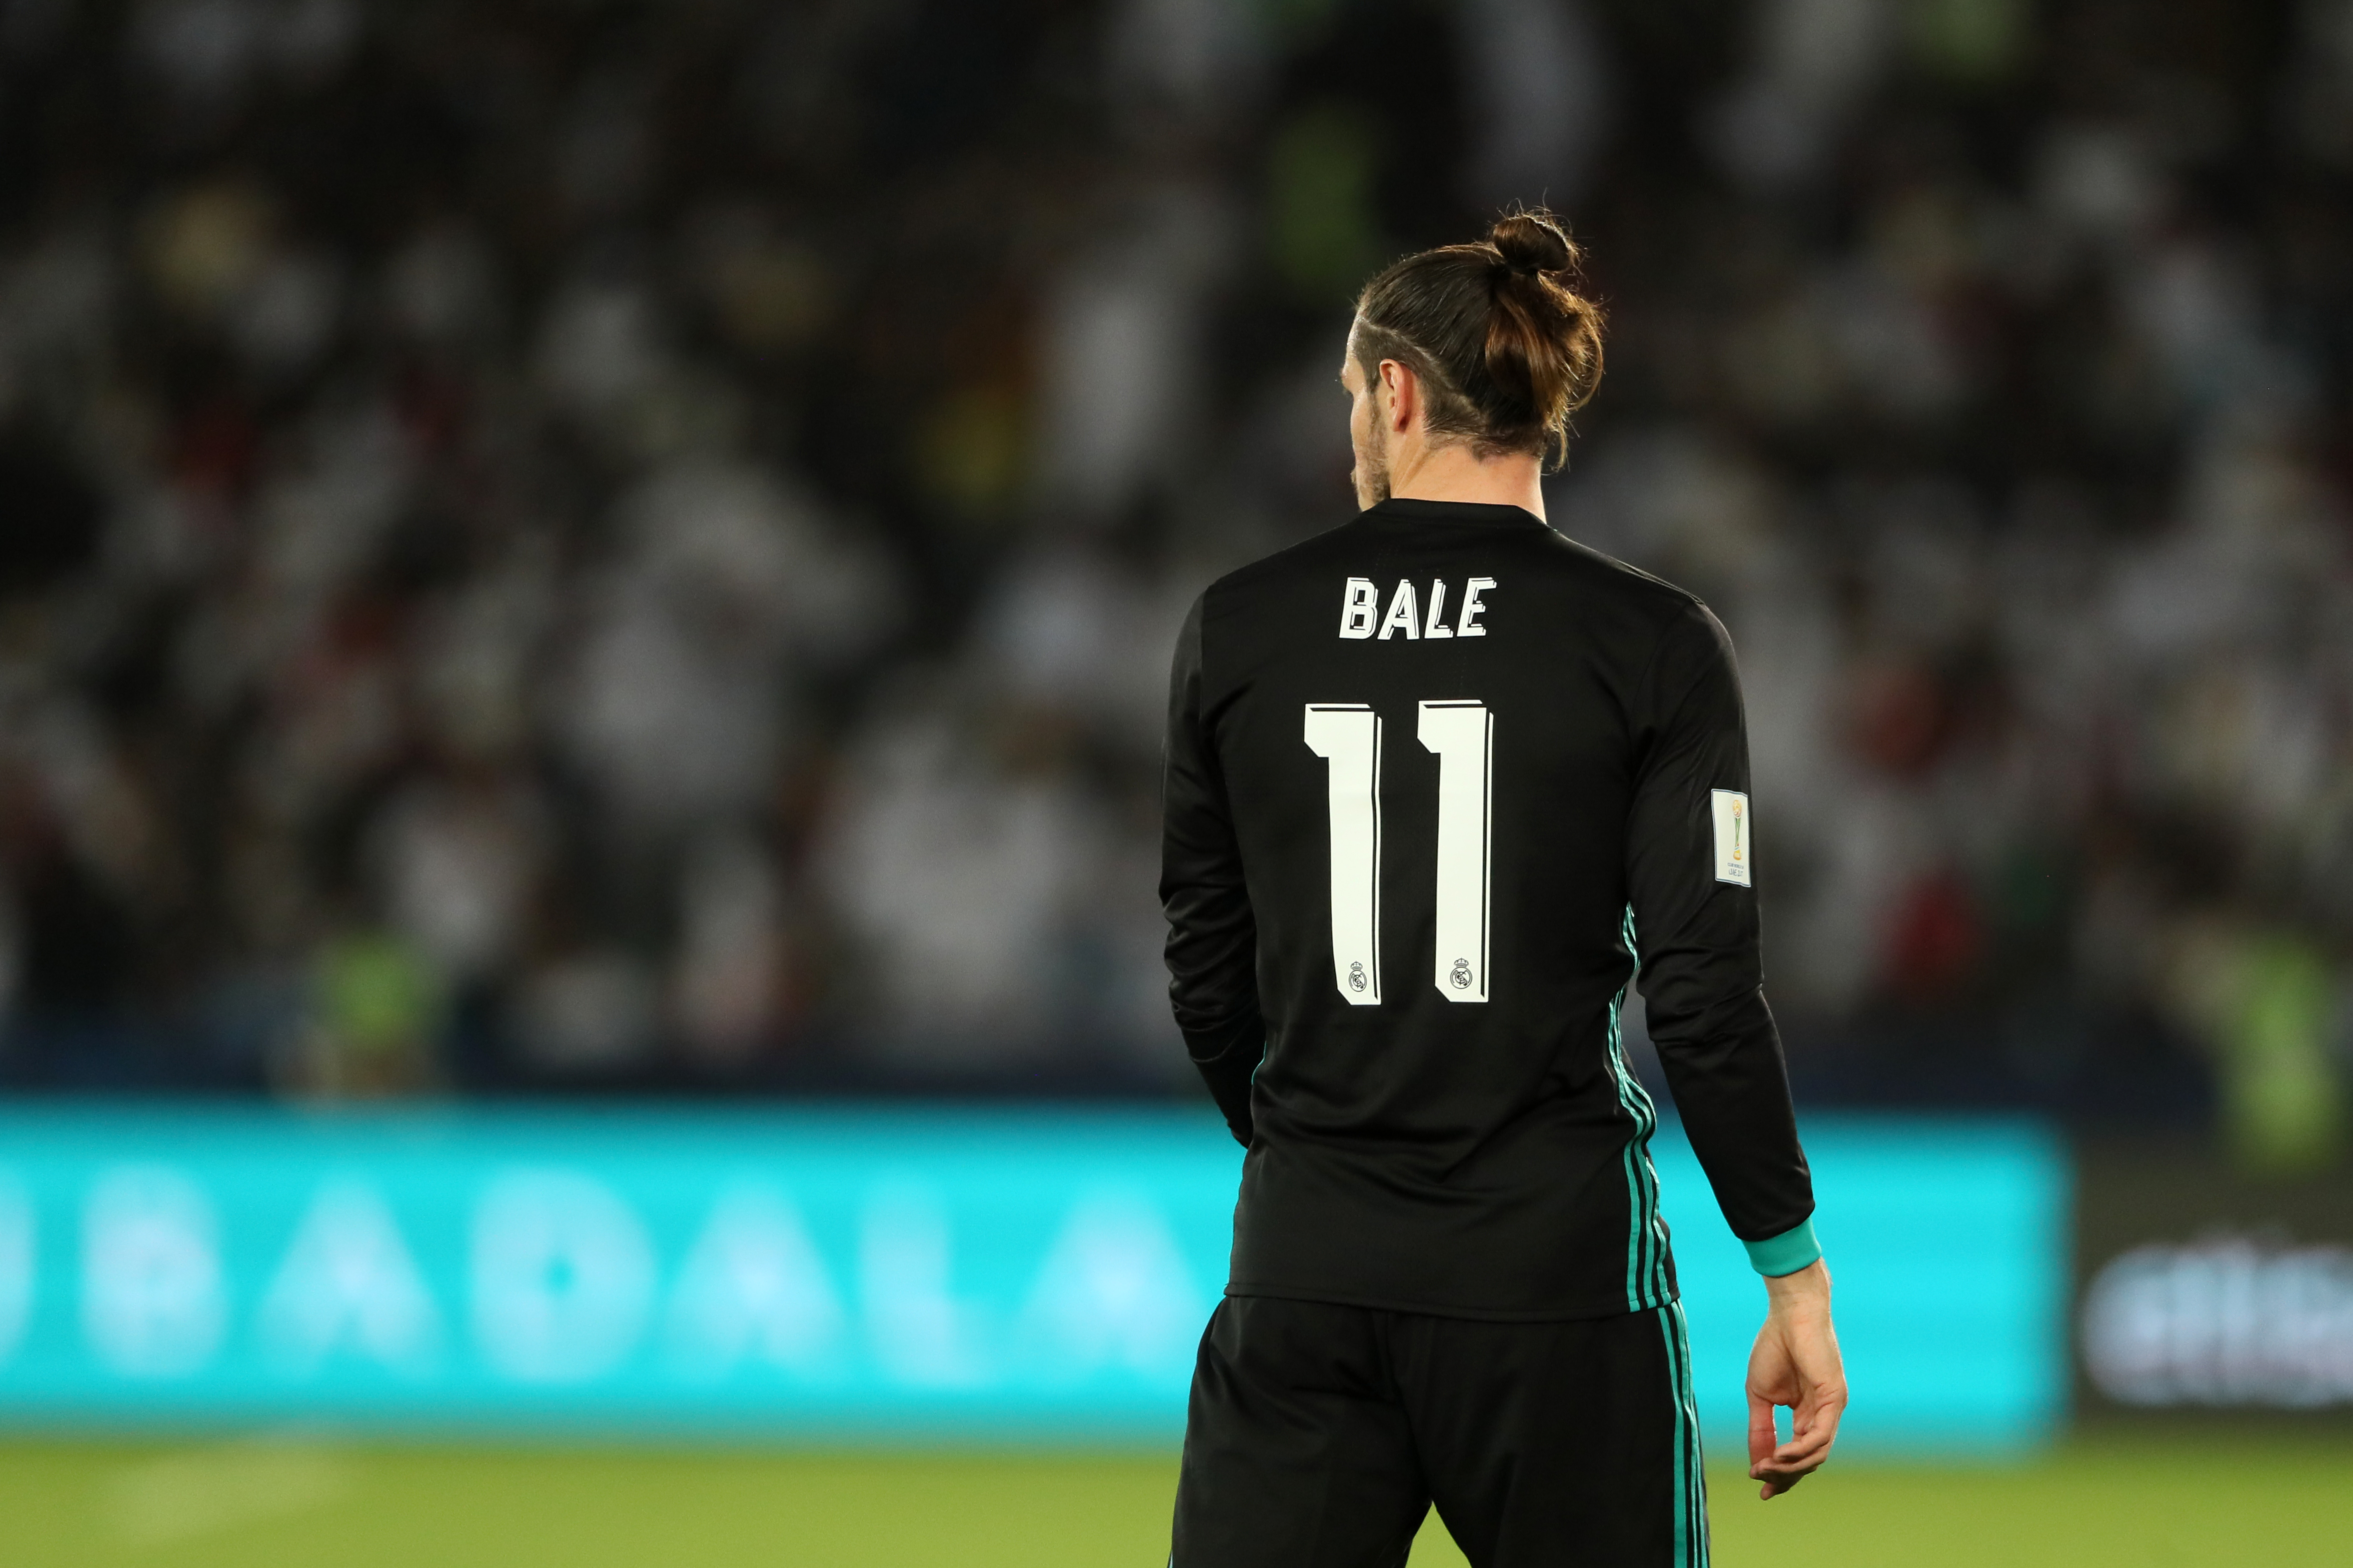 Gareth Bale surprised us with two meaningful late appearances, but what now?